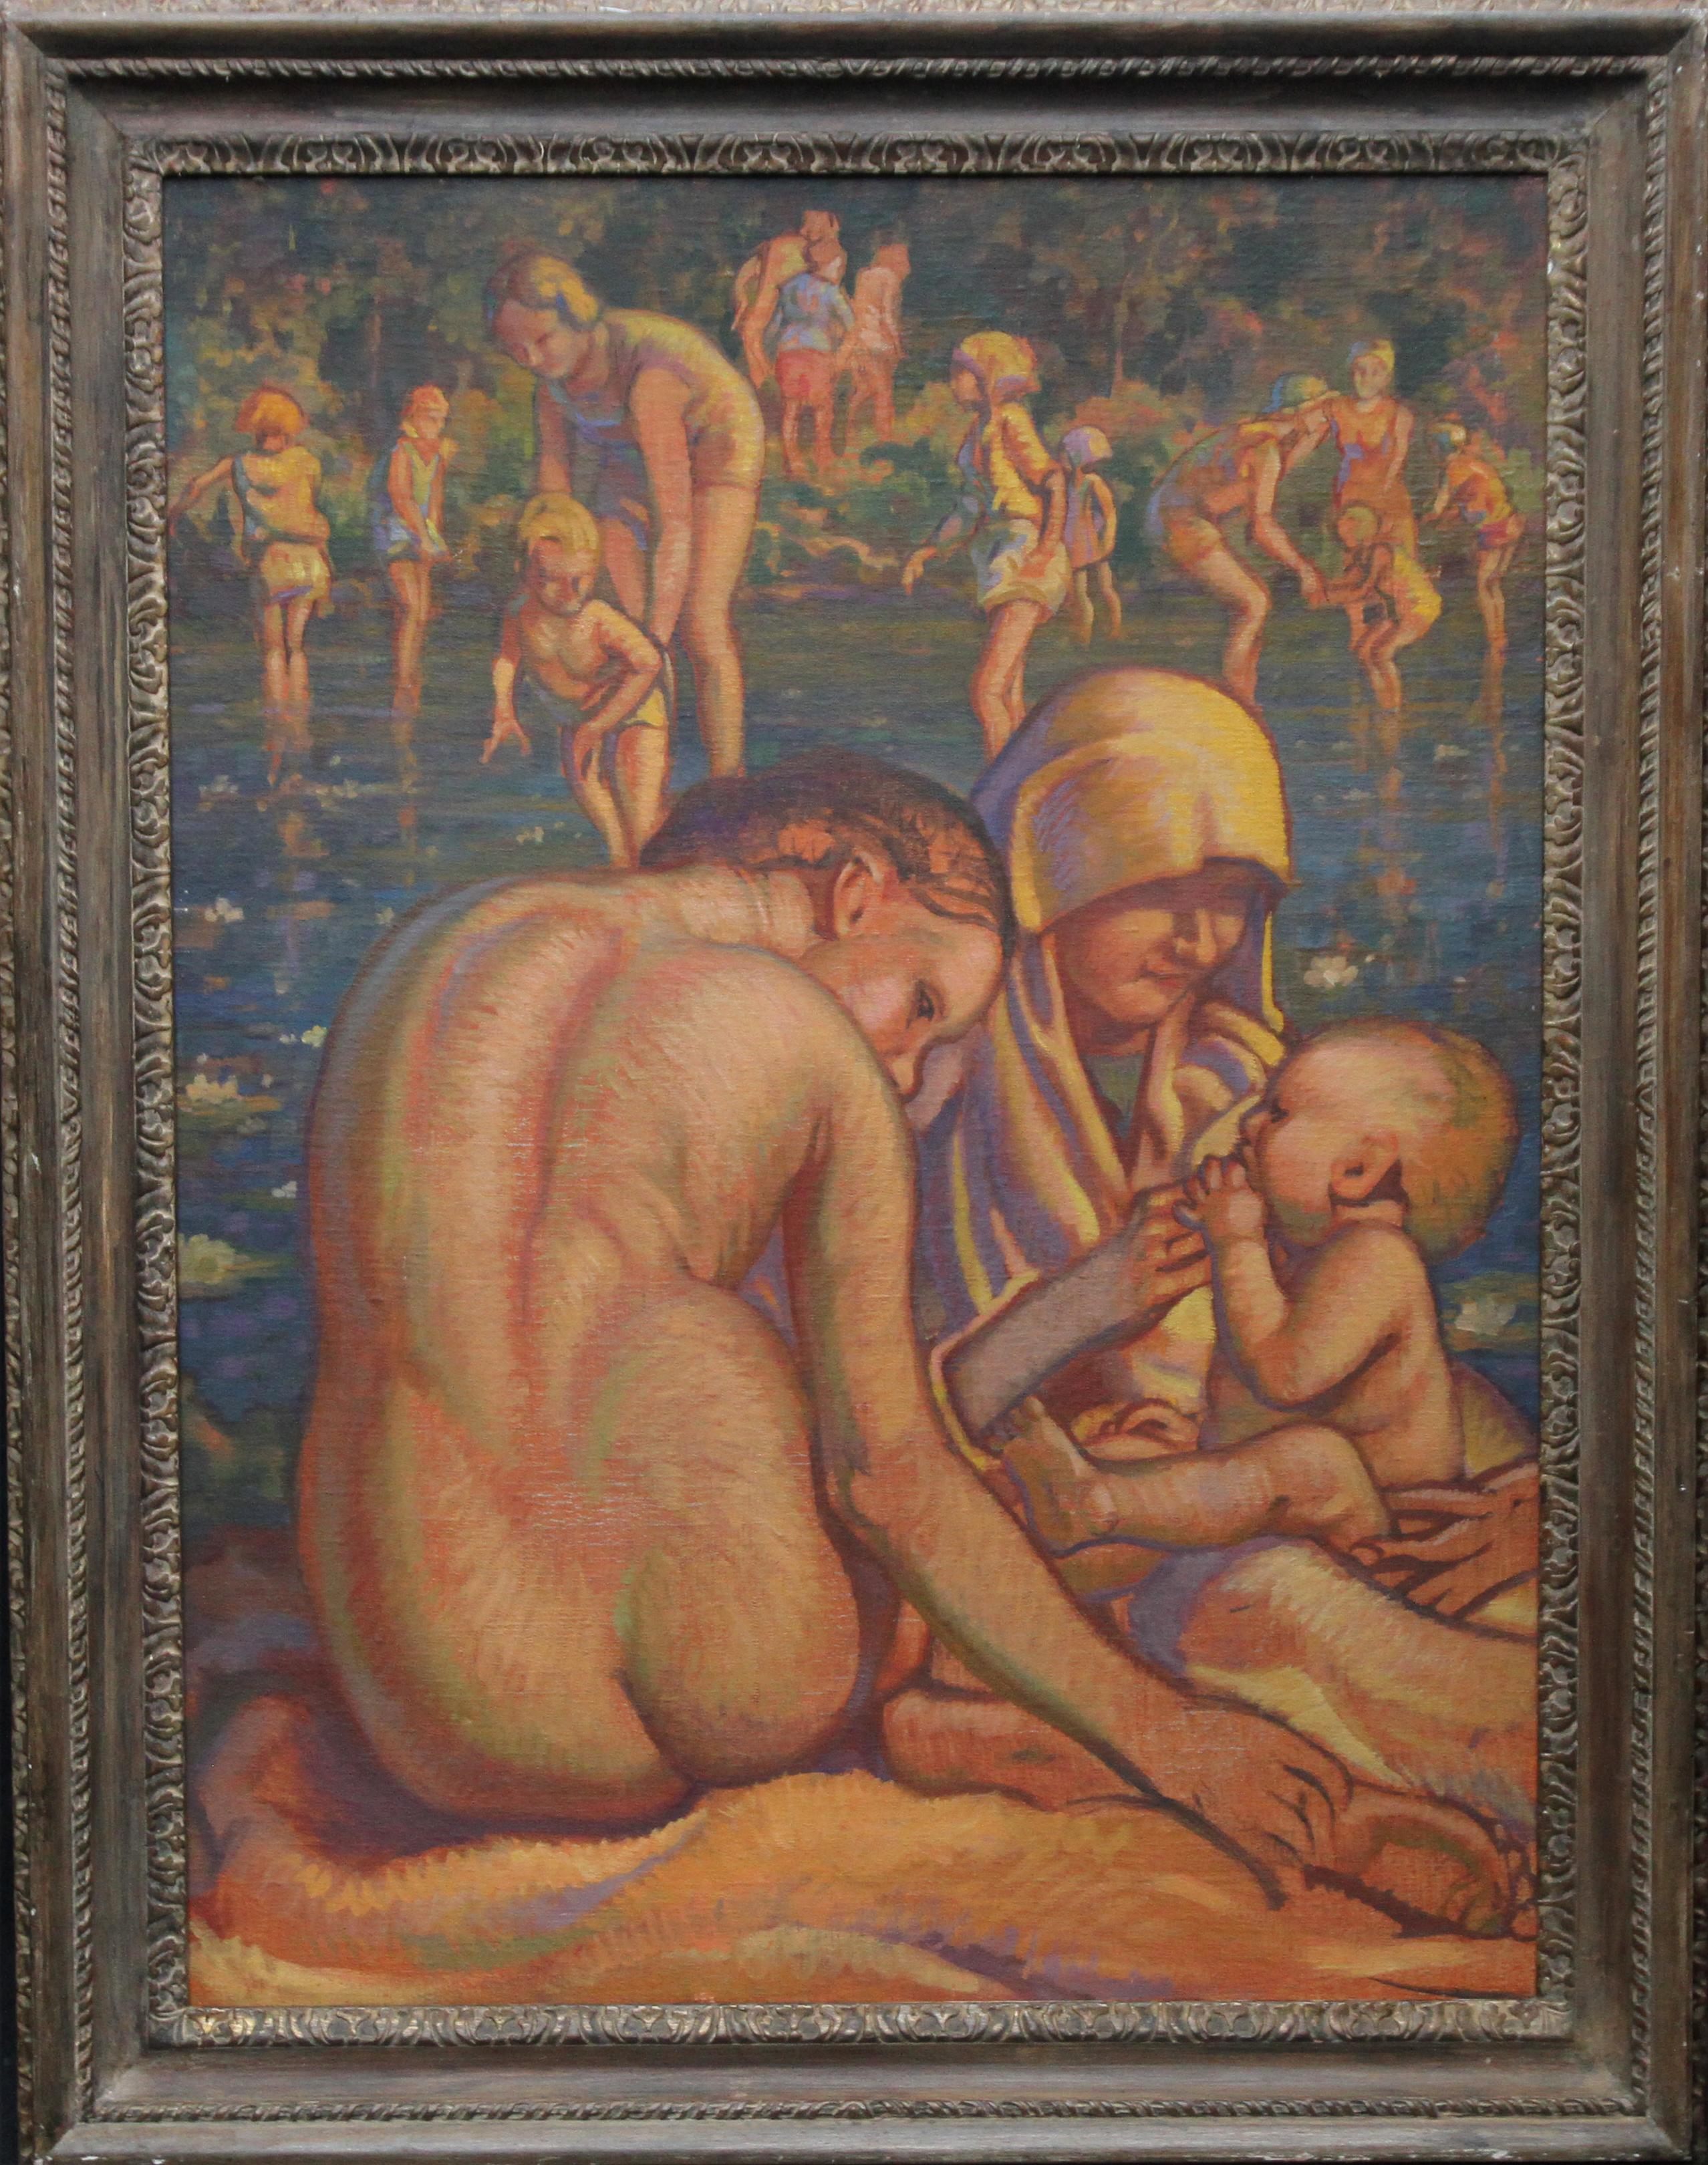 Mother and Child Bathing - British Slade School 30's Art Deco nude oil painting